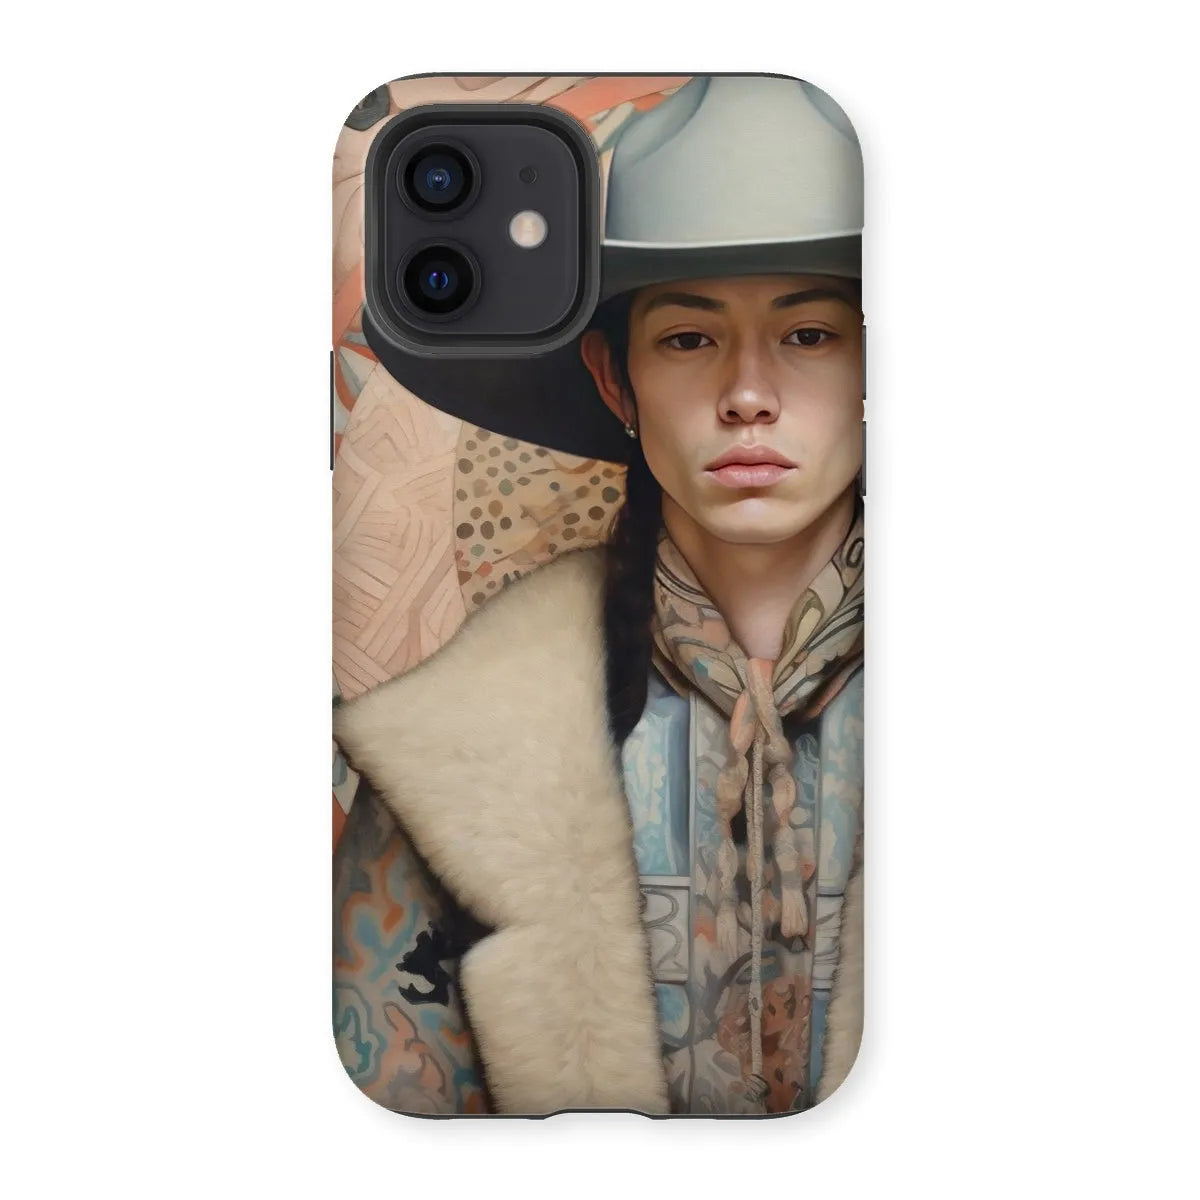 Jacy The Gay Cowboy - Dandy Gay Aesthetic Art Phone Case - Iphone 12 / Matte - Mobile Phone Cases - Aesthetic Art